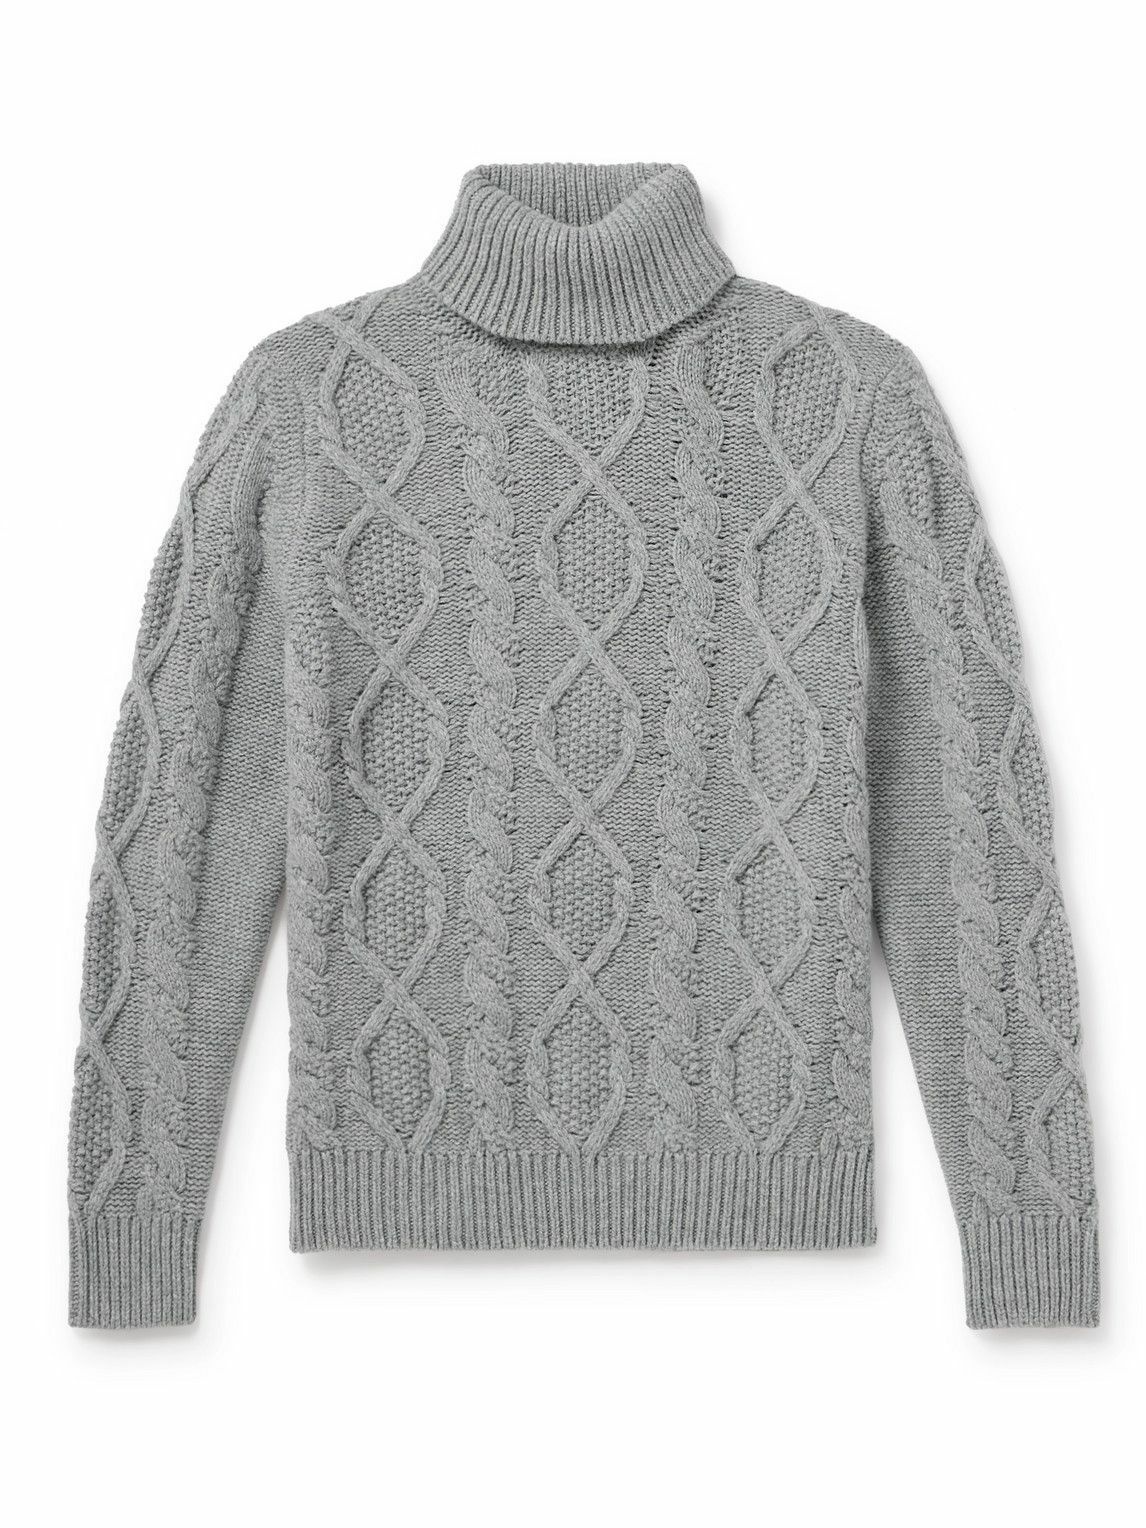 Anderson & Sheppard - Aran Cable-Knit Wool and Cashmere-Blend Rollneck  Sweater - Gray Anderson & Sheppard